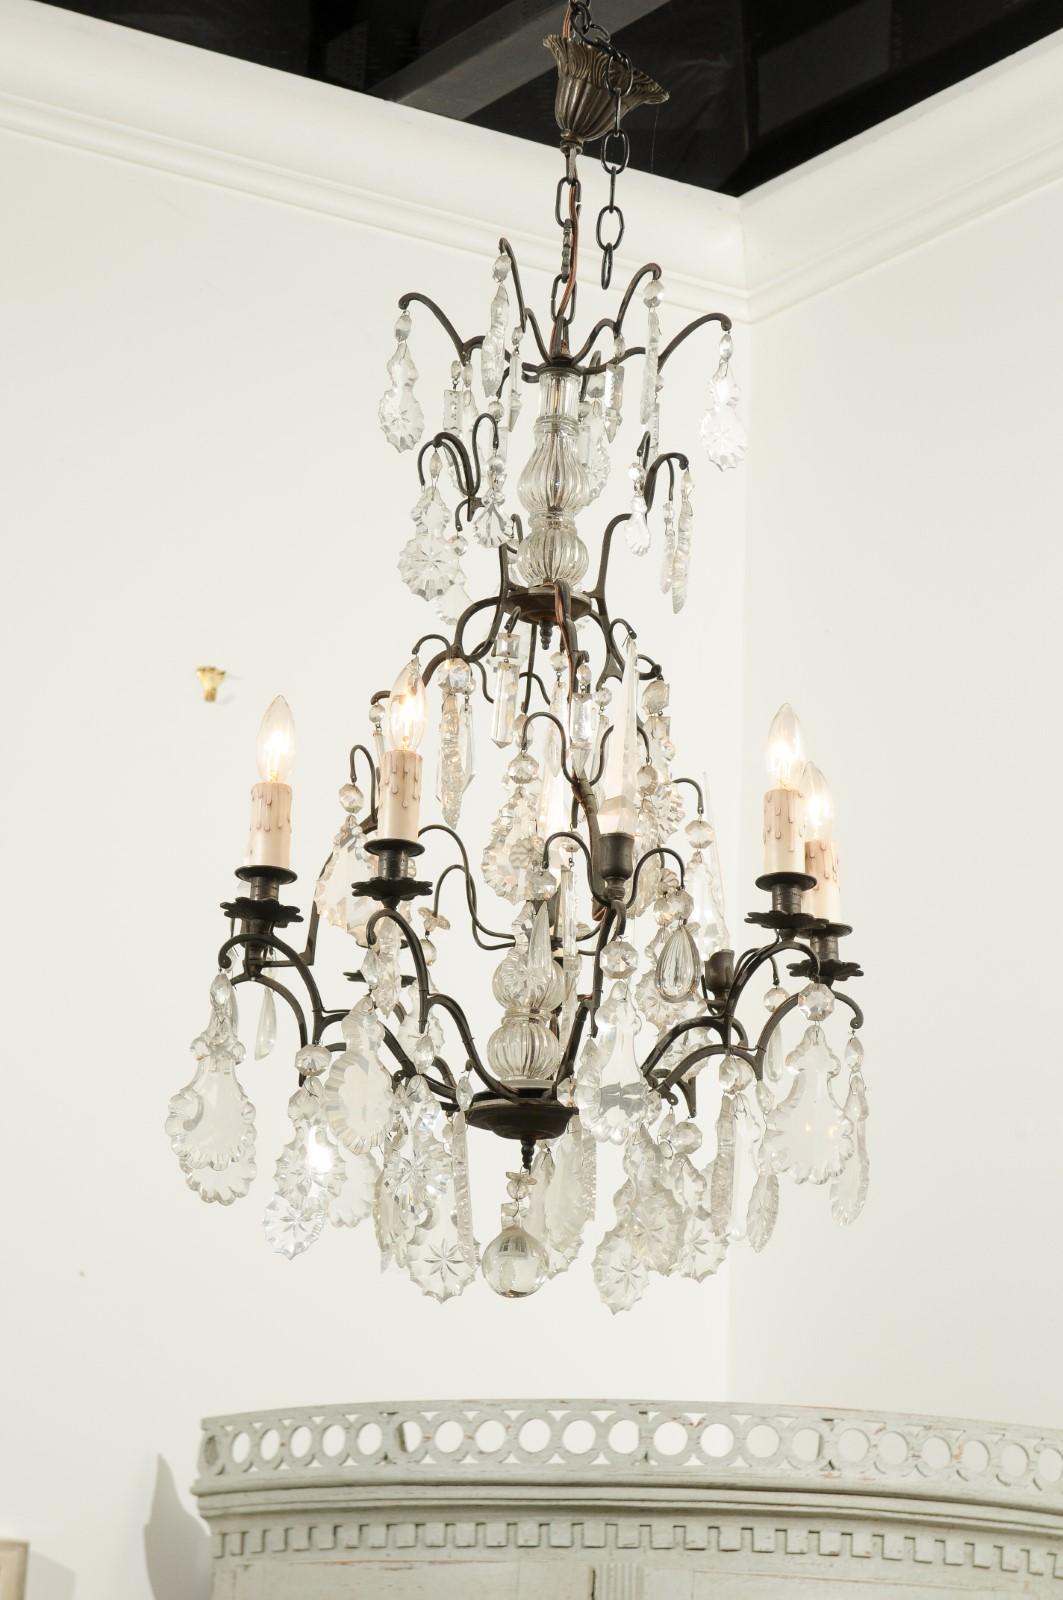 A French six-light crystal chandelier from the 19th century, with iron armature and obelisk motifs. This exquisite French crystal chandelier features a central crystal column, topped with petite scrolls supporting various pendeloques. The